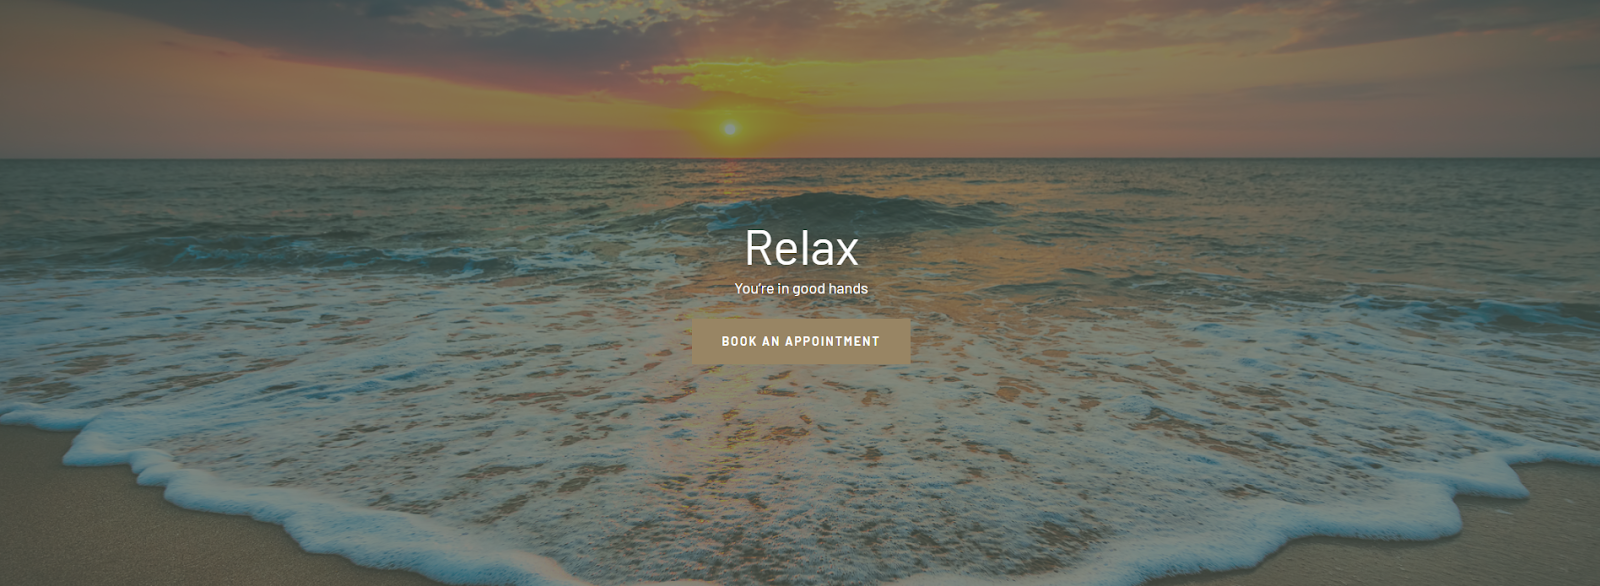 screenshot of a hypnotherapy website